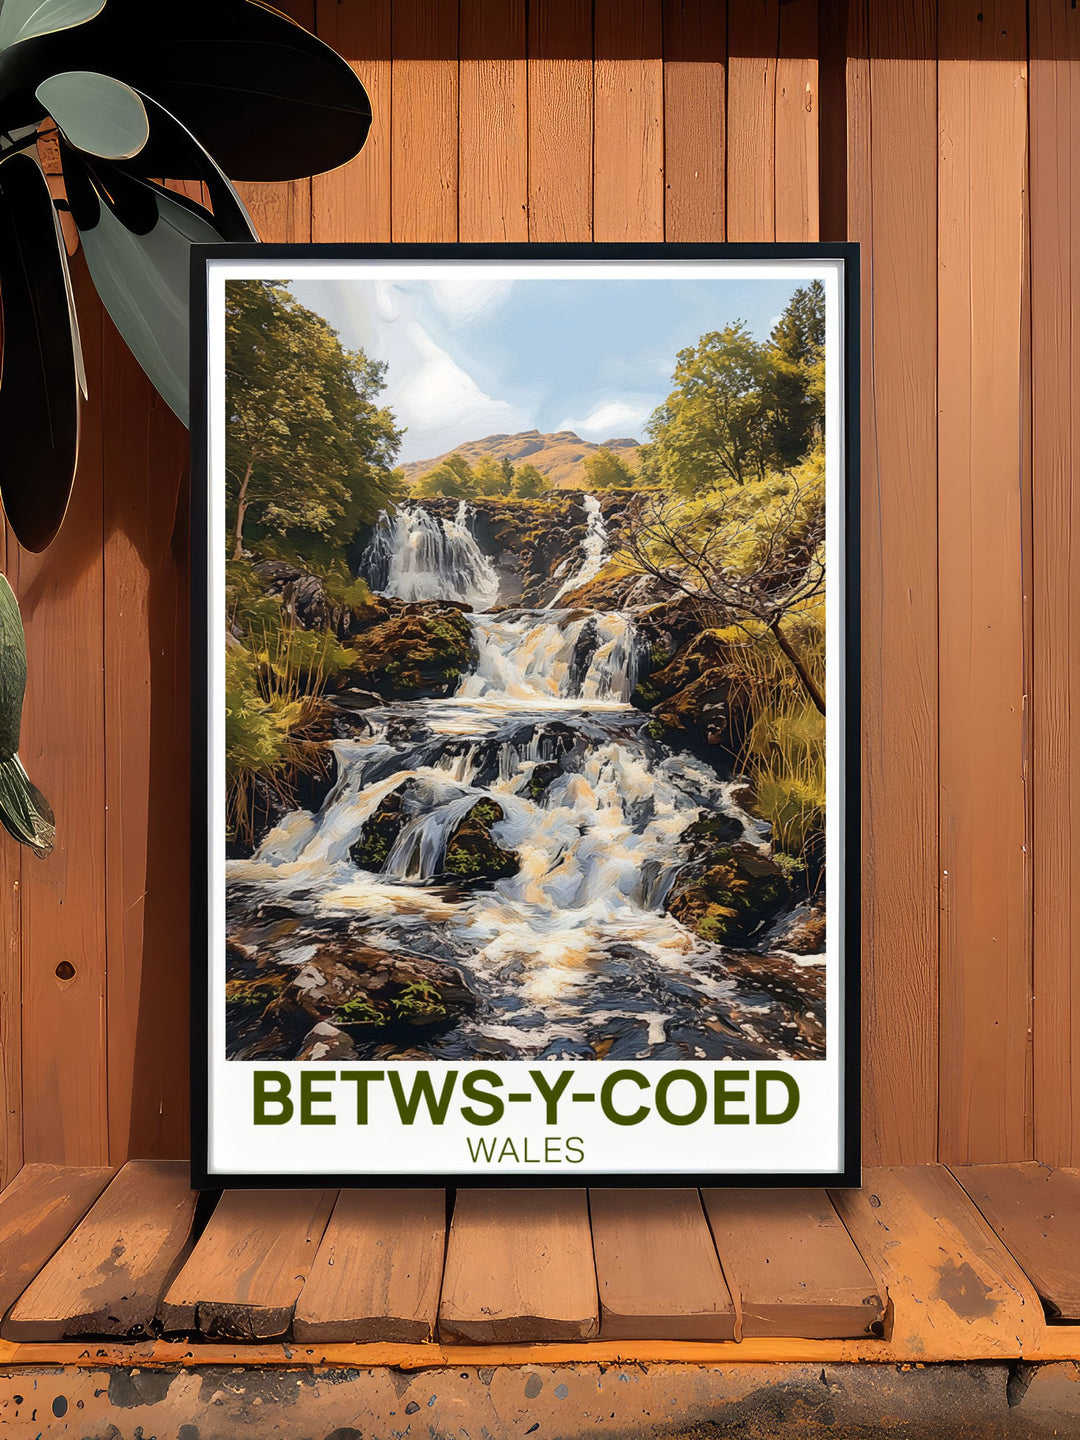 Modern art print of Betws y Coed featuring the picturesque scenery and historic sites of this Welsh village a perfect choice for decorating your home Swallow Falls is beautifully integrated into the artwork.